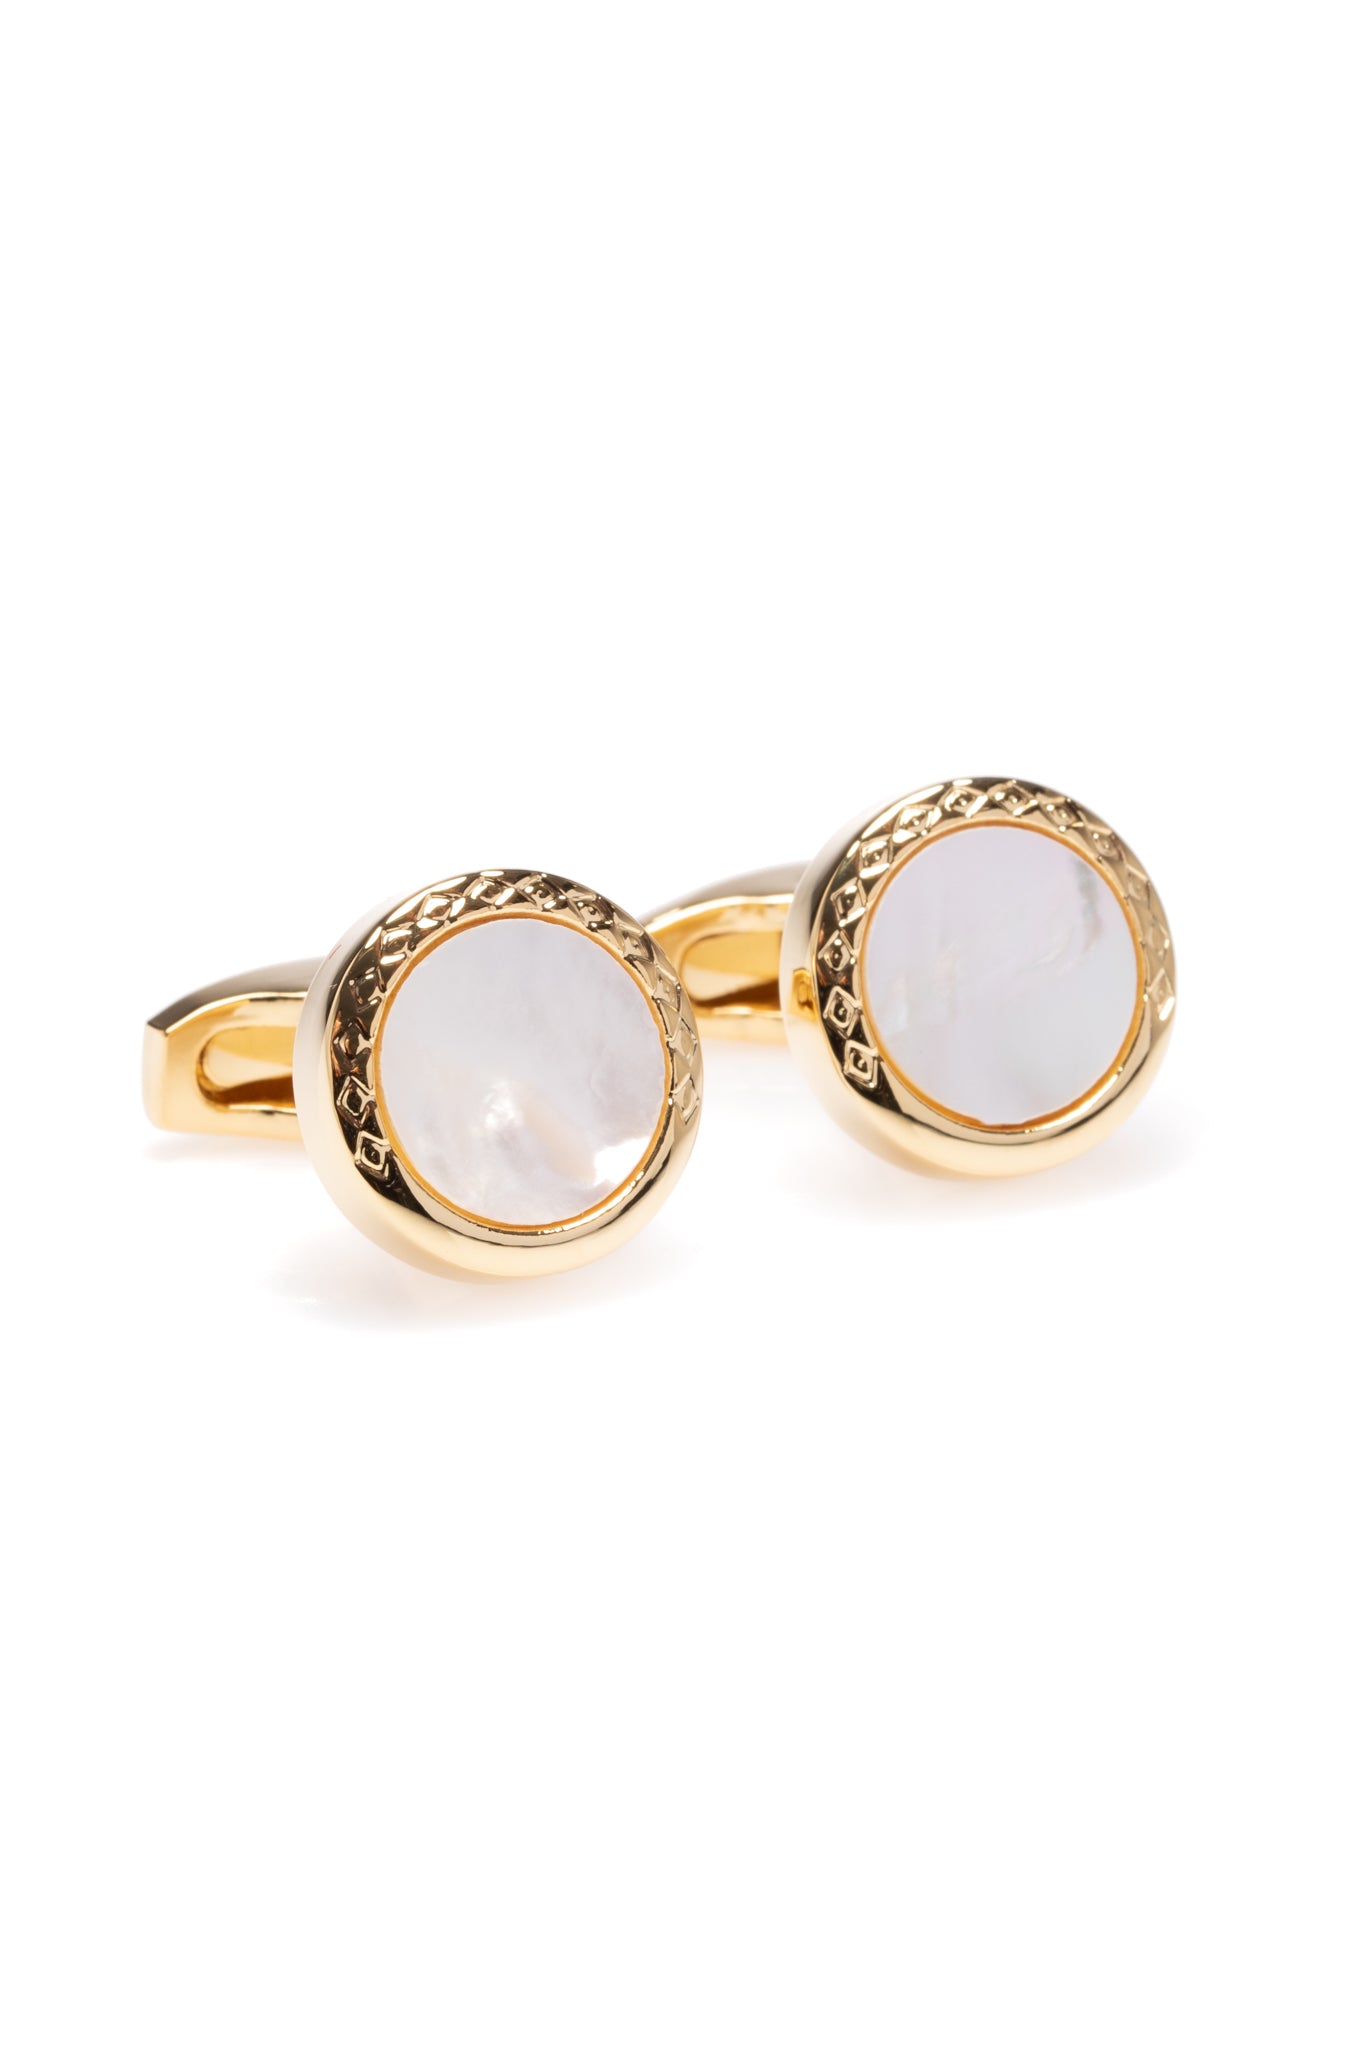 Round golden buttons with white stone